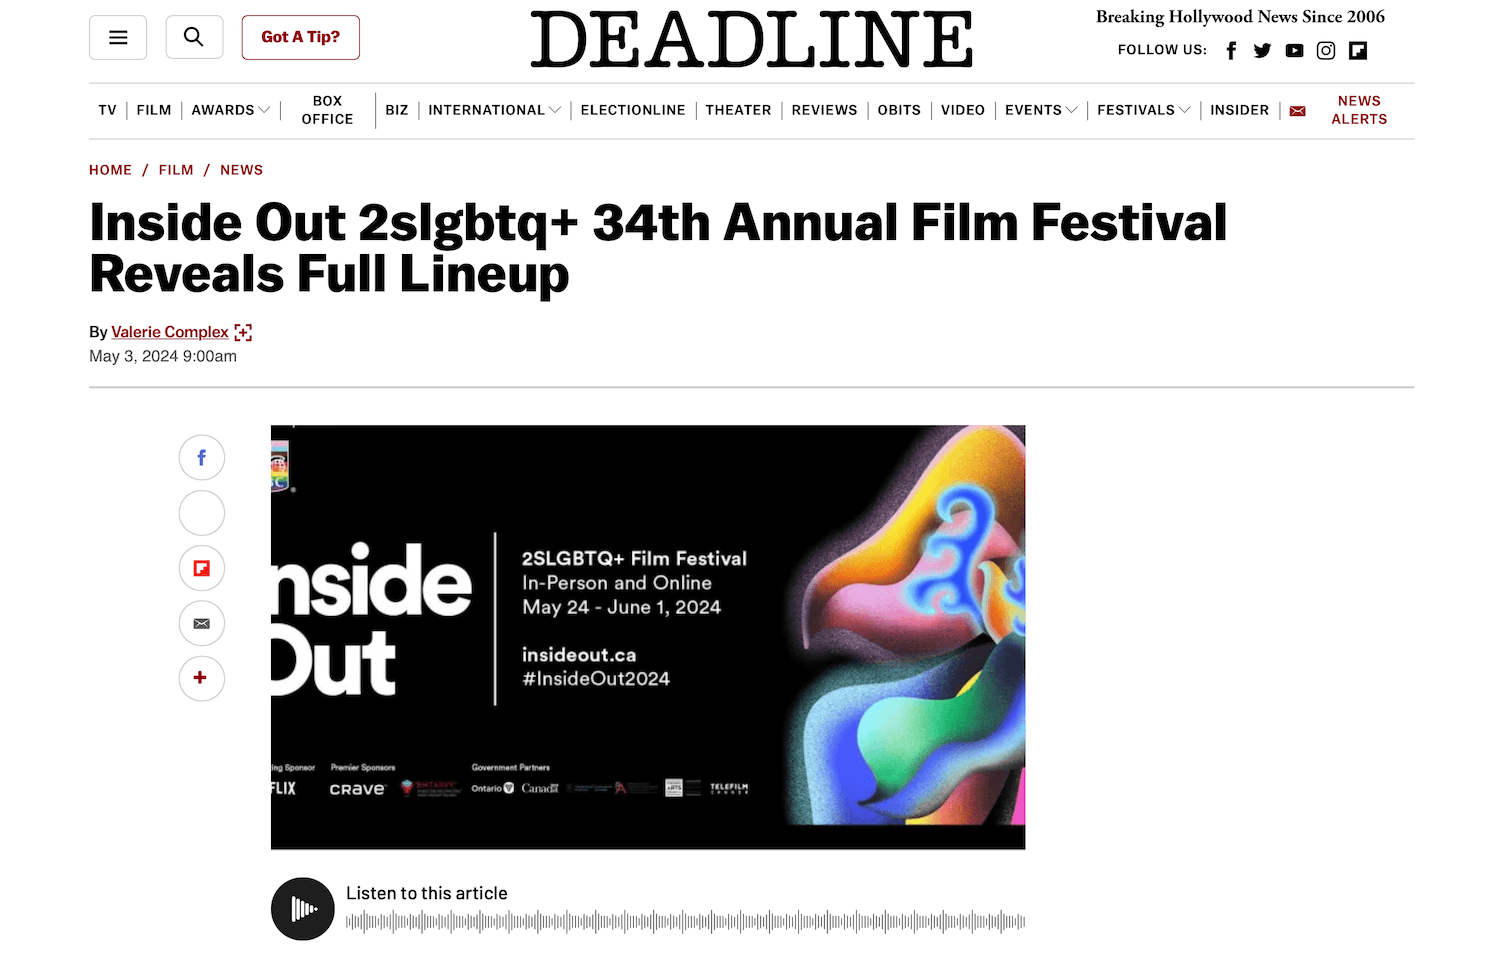 Deadline Inside Out Film Festival Mother Father sister Brother Frank littleBULL Prouductions